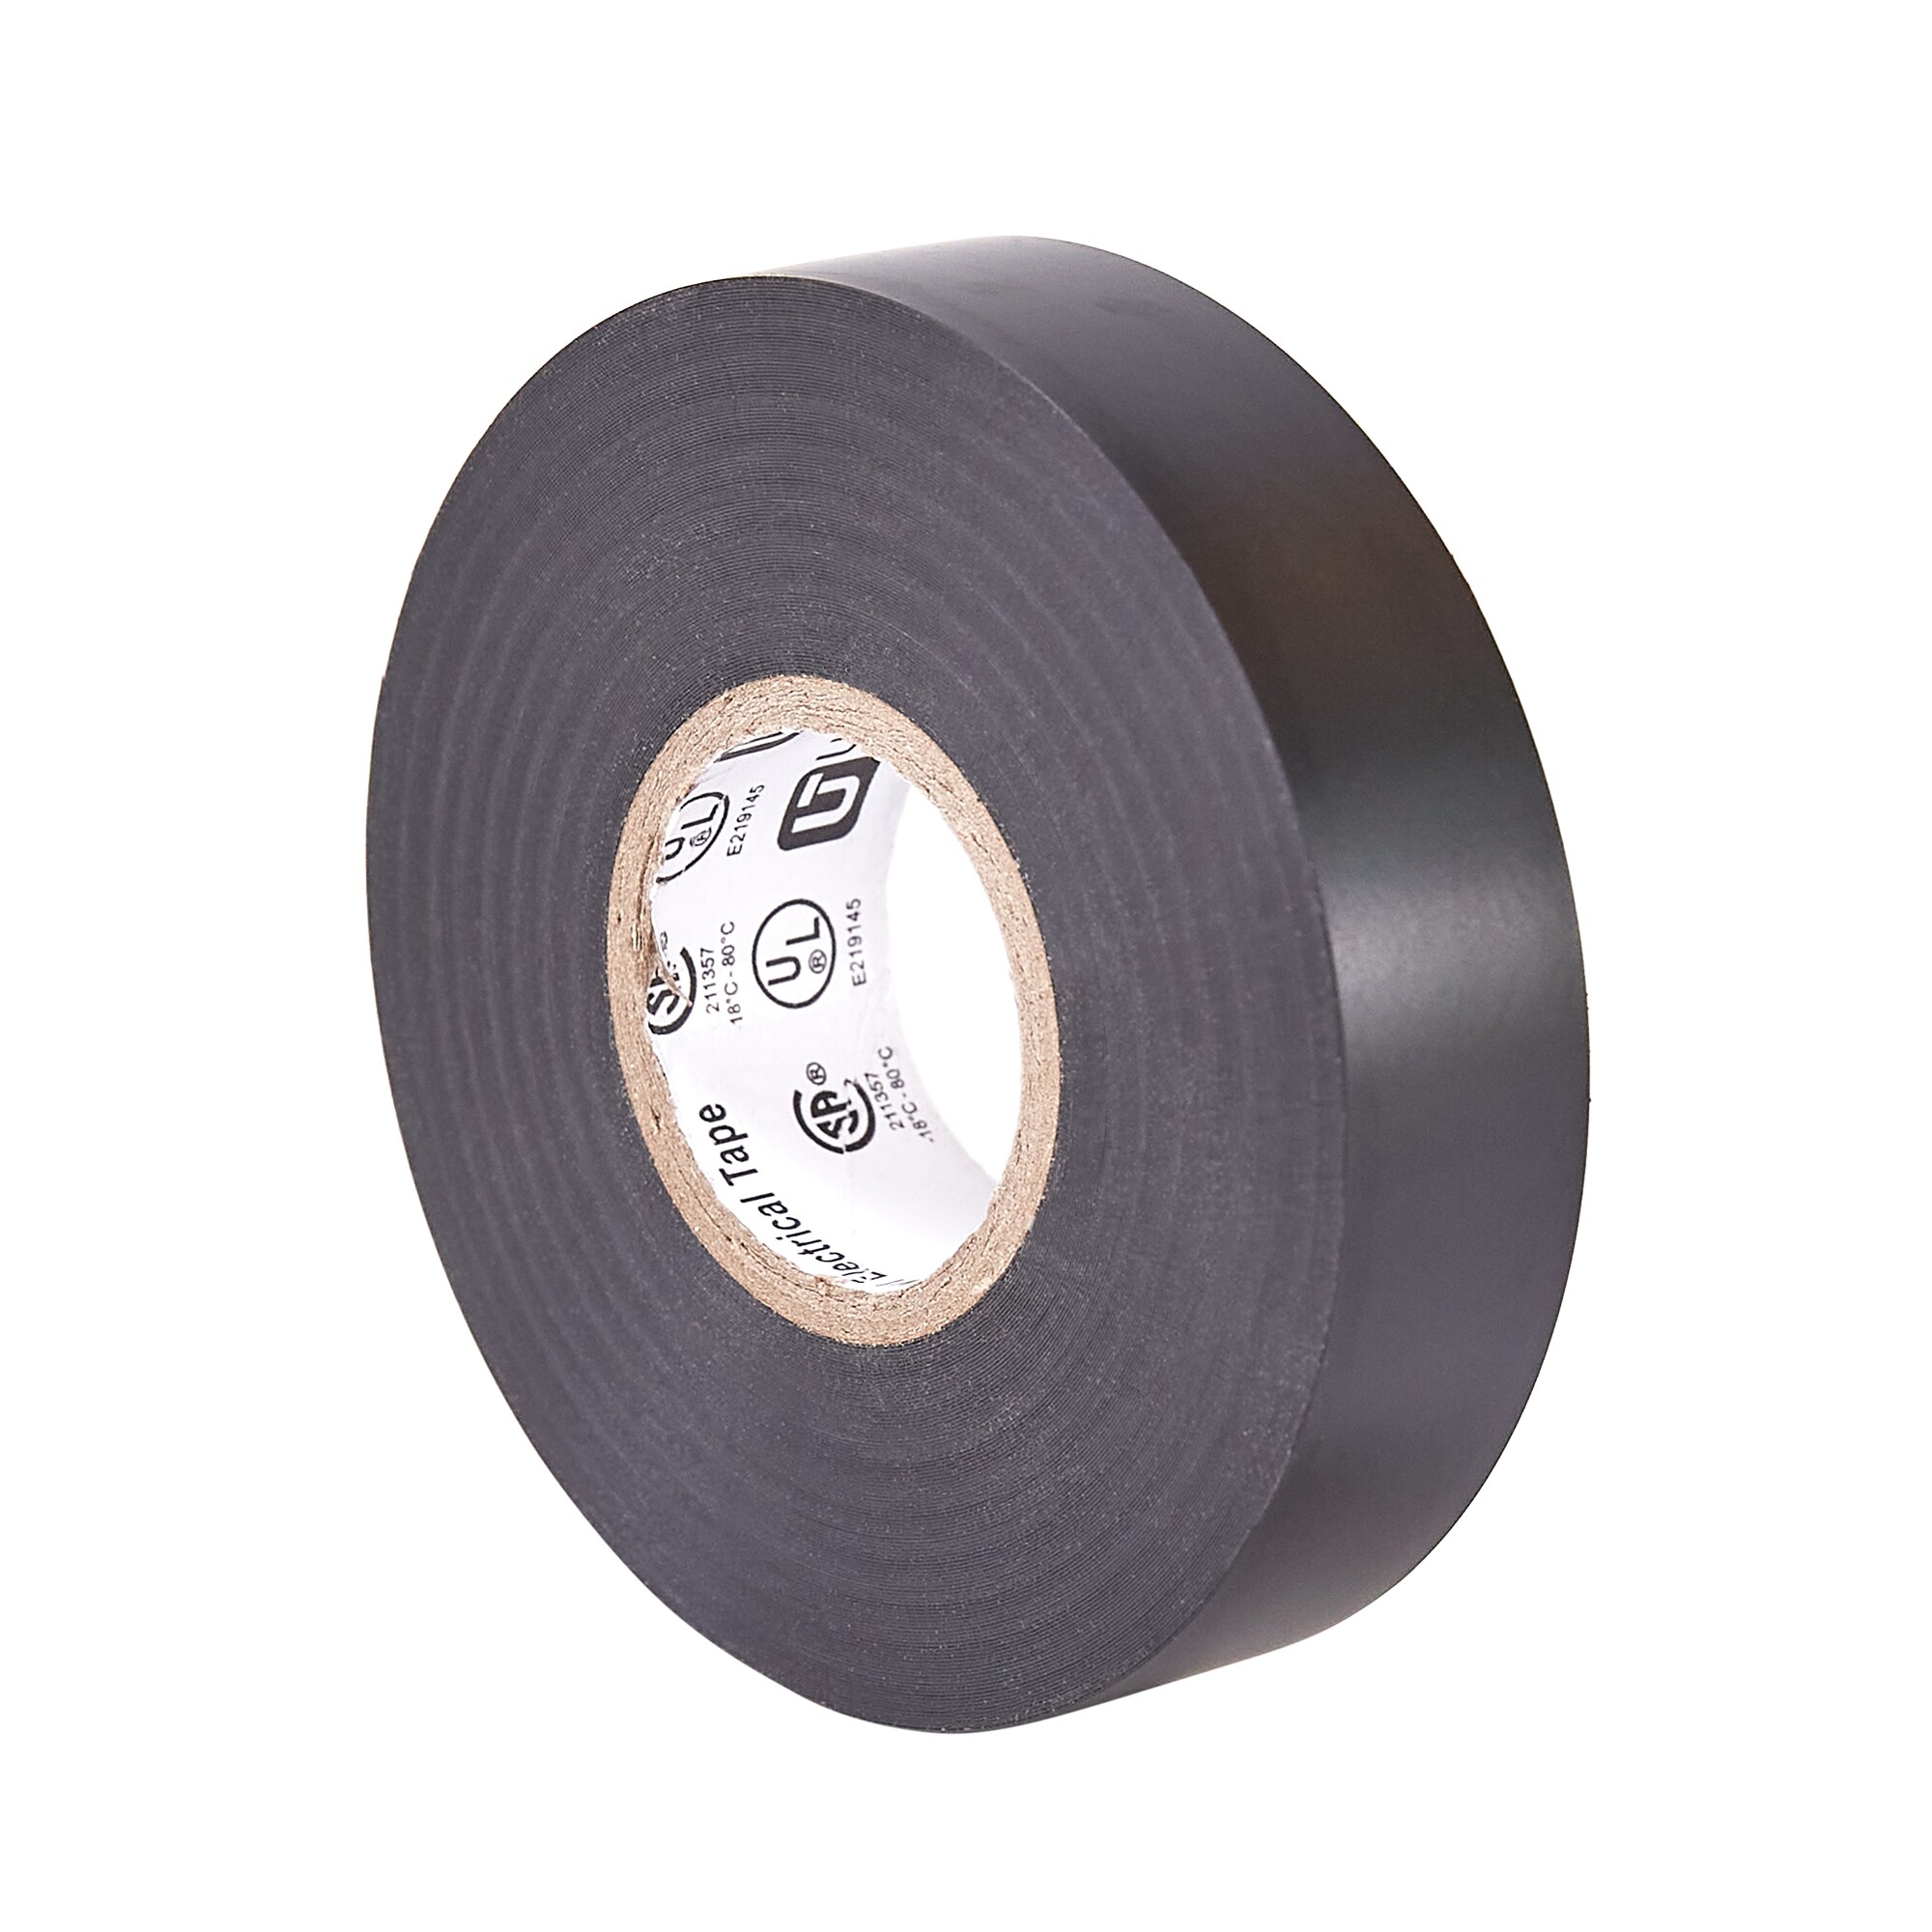 FREE SHIPPING! Utilitech 60-ft Black Electrical Wire Tape 10 Roll Per Pack 